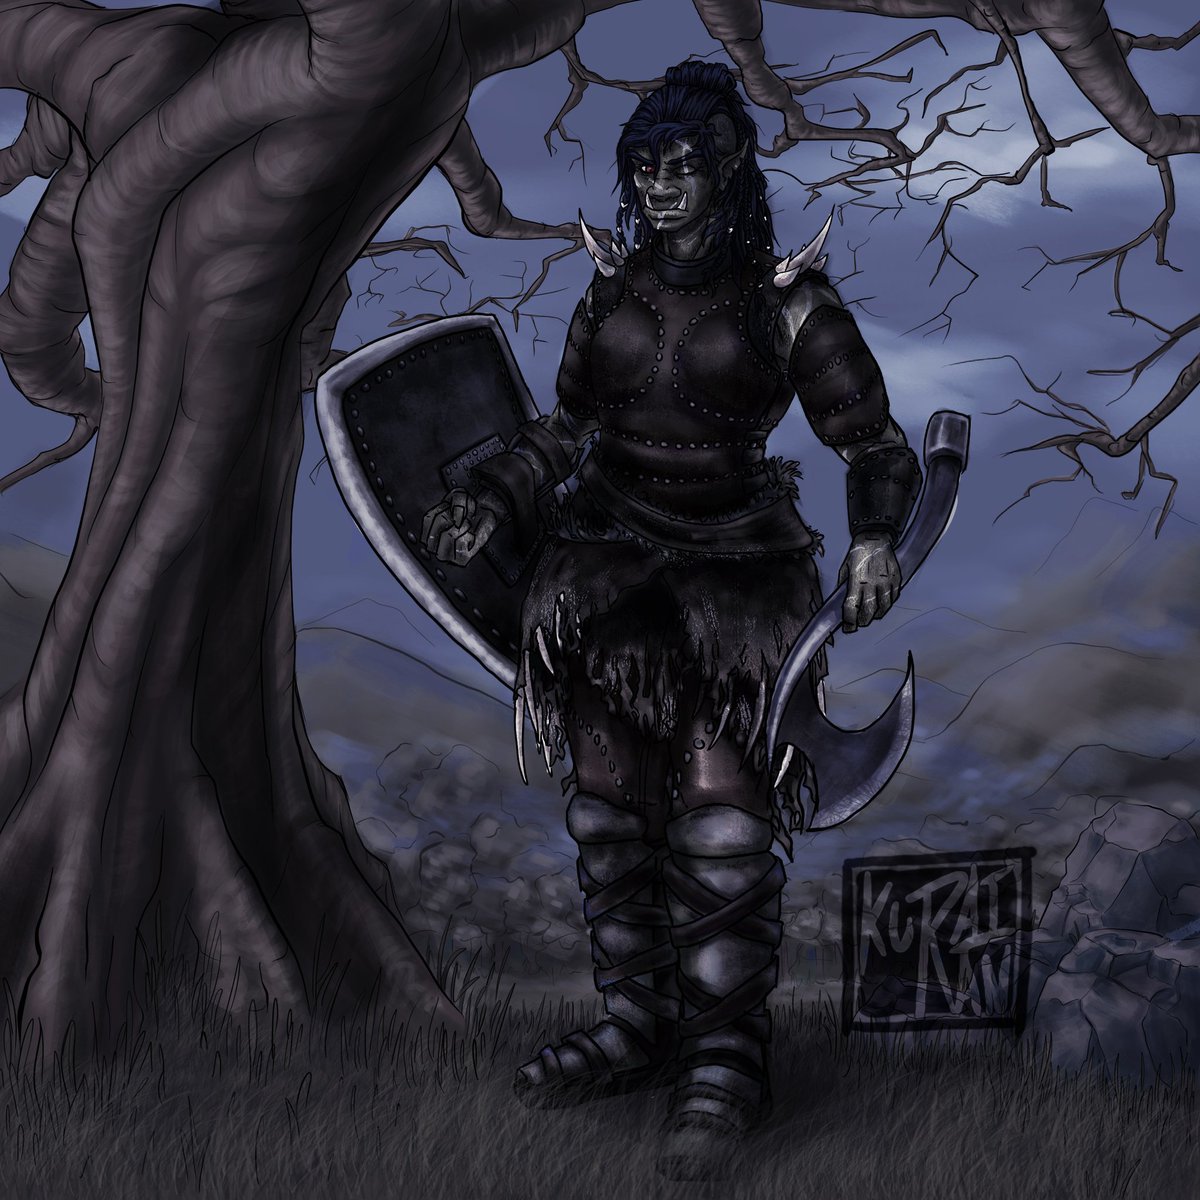 FINALLY! It's not perfect, but I'm finally calling it done! And I'll have to make a new updated version of her in the future!
Hope you guys like her <3
#illustration #drawing #painting #digitalart #digital #oc #orc #warrior #shadowofthedemonlord #shield #axe #ptartist #tugartist